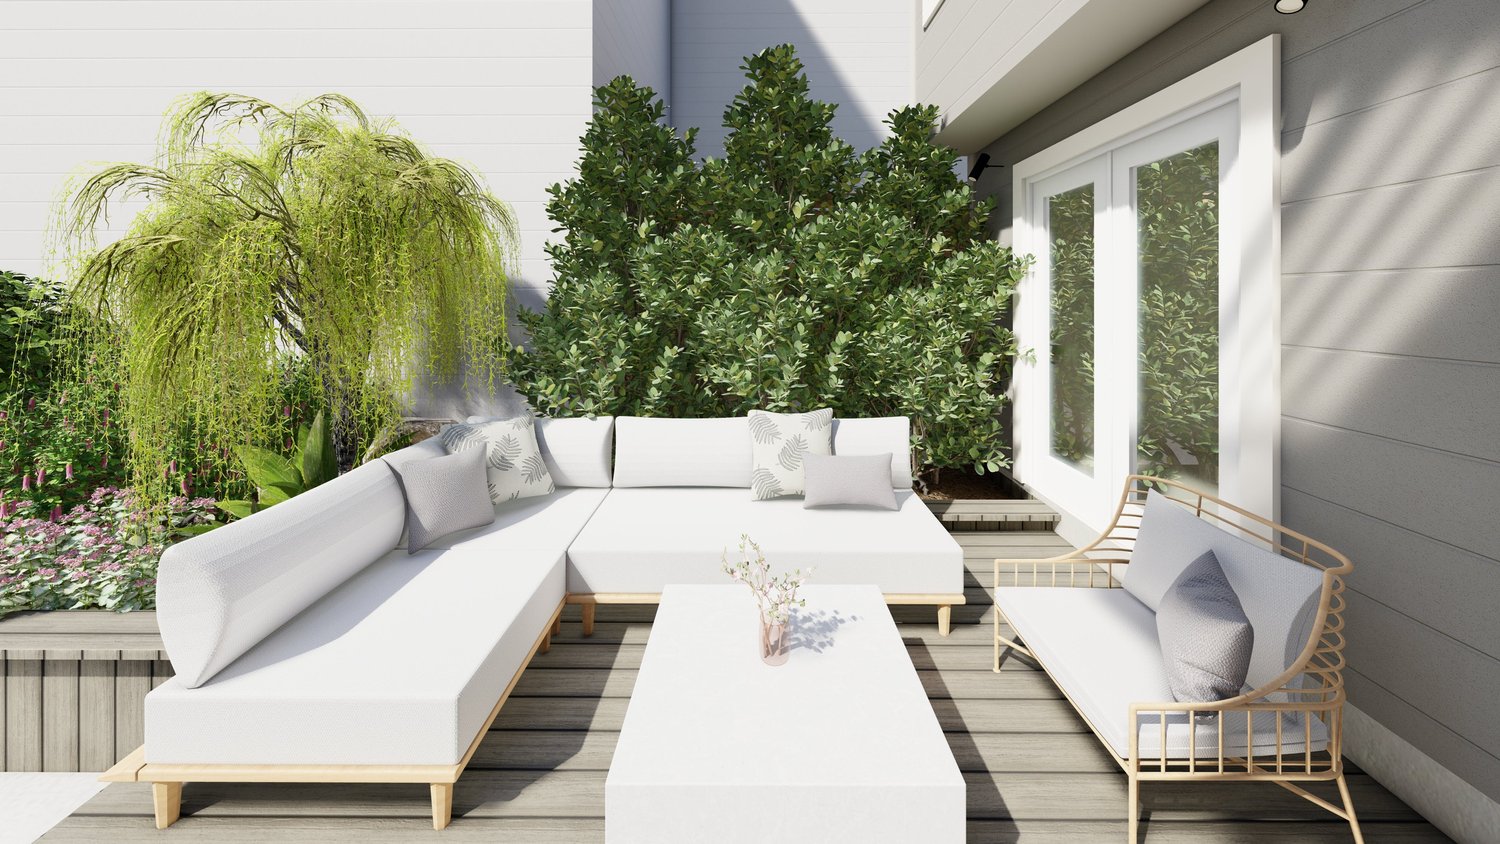 San Francisco side yard deck patio with sectionals and plantings